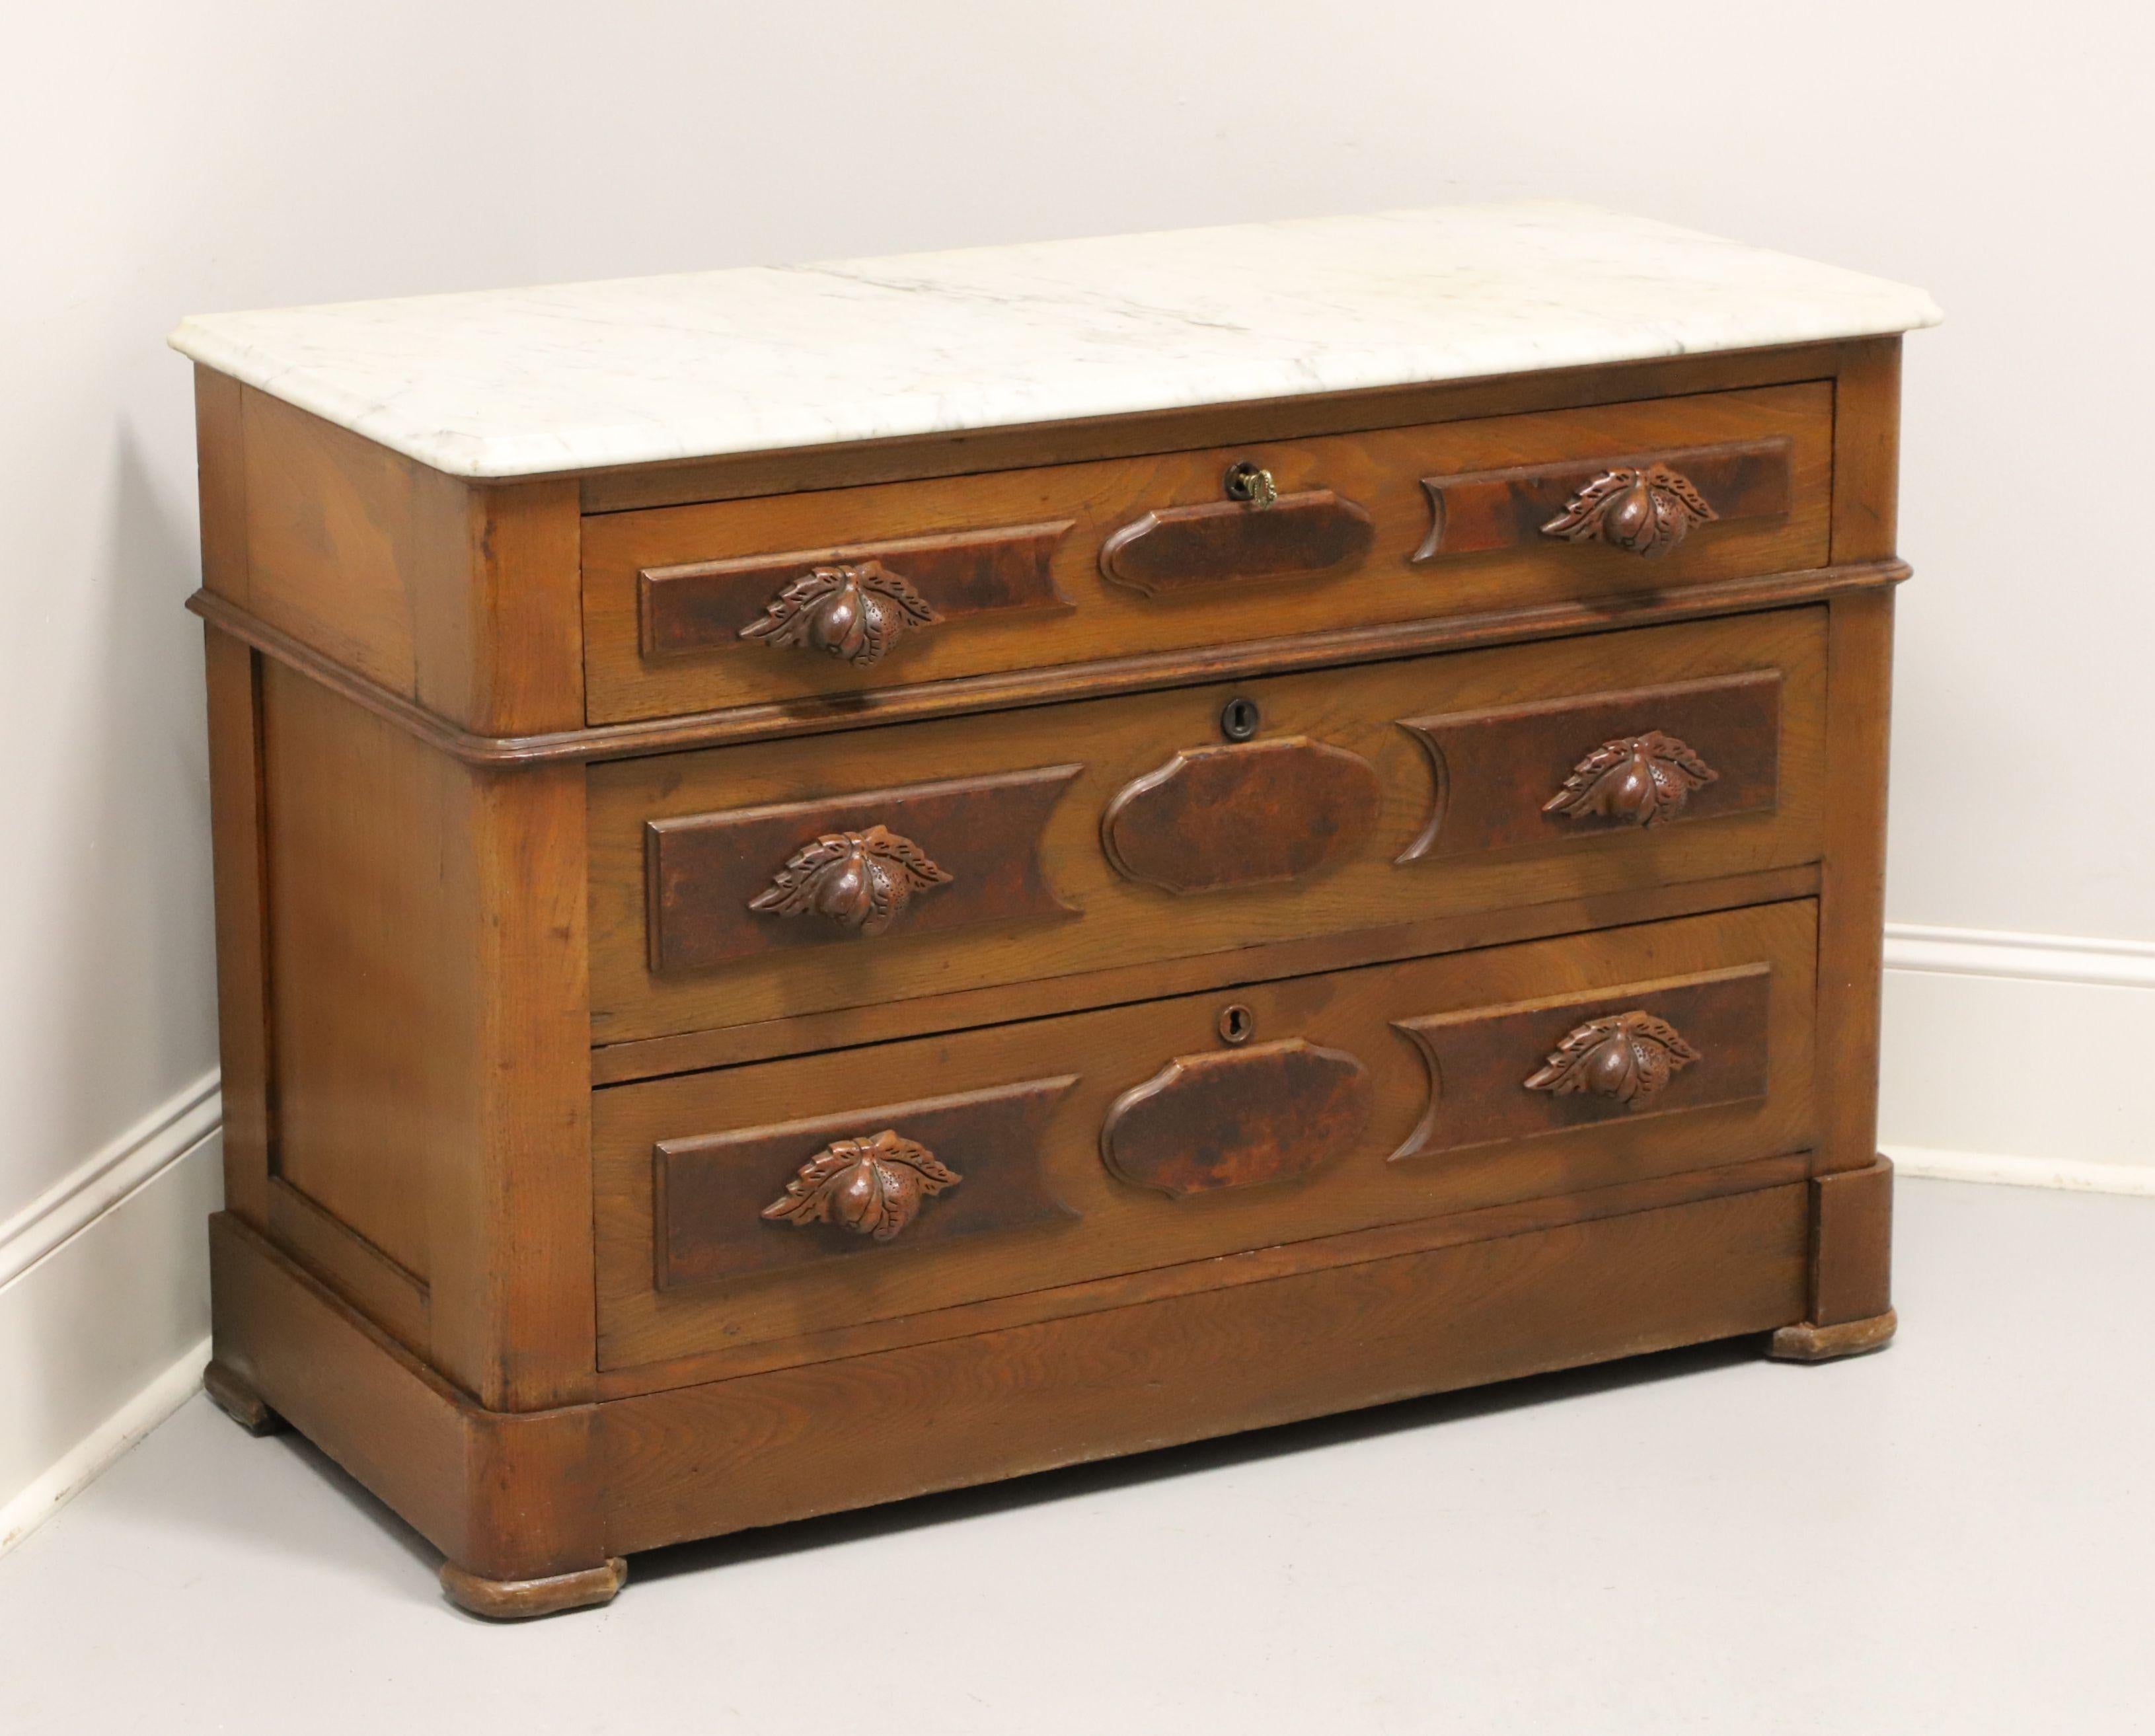 An antique Victorian style marble top four-drawer chest, unbranded. Walnut with burl walnut to drawer fronts, ogee edge marble top, decoratively carved wood handles, brass keyhole escutcheons, solid base and pad feet. Features three upper drawers of